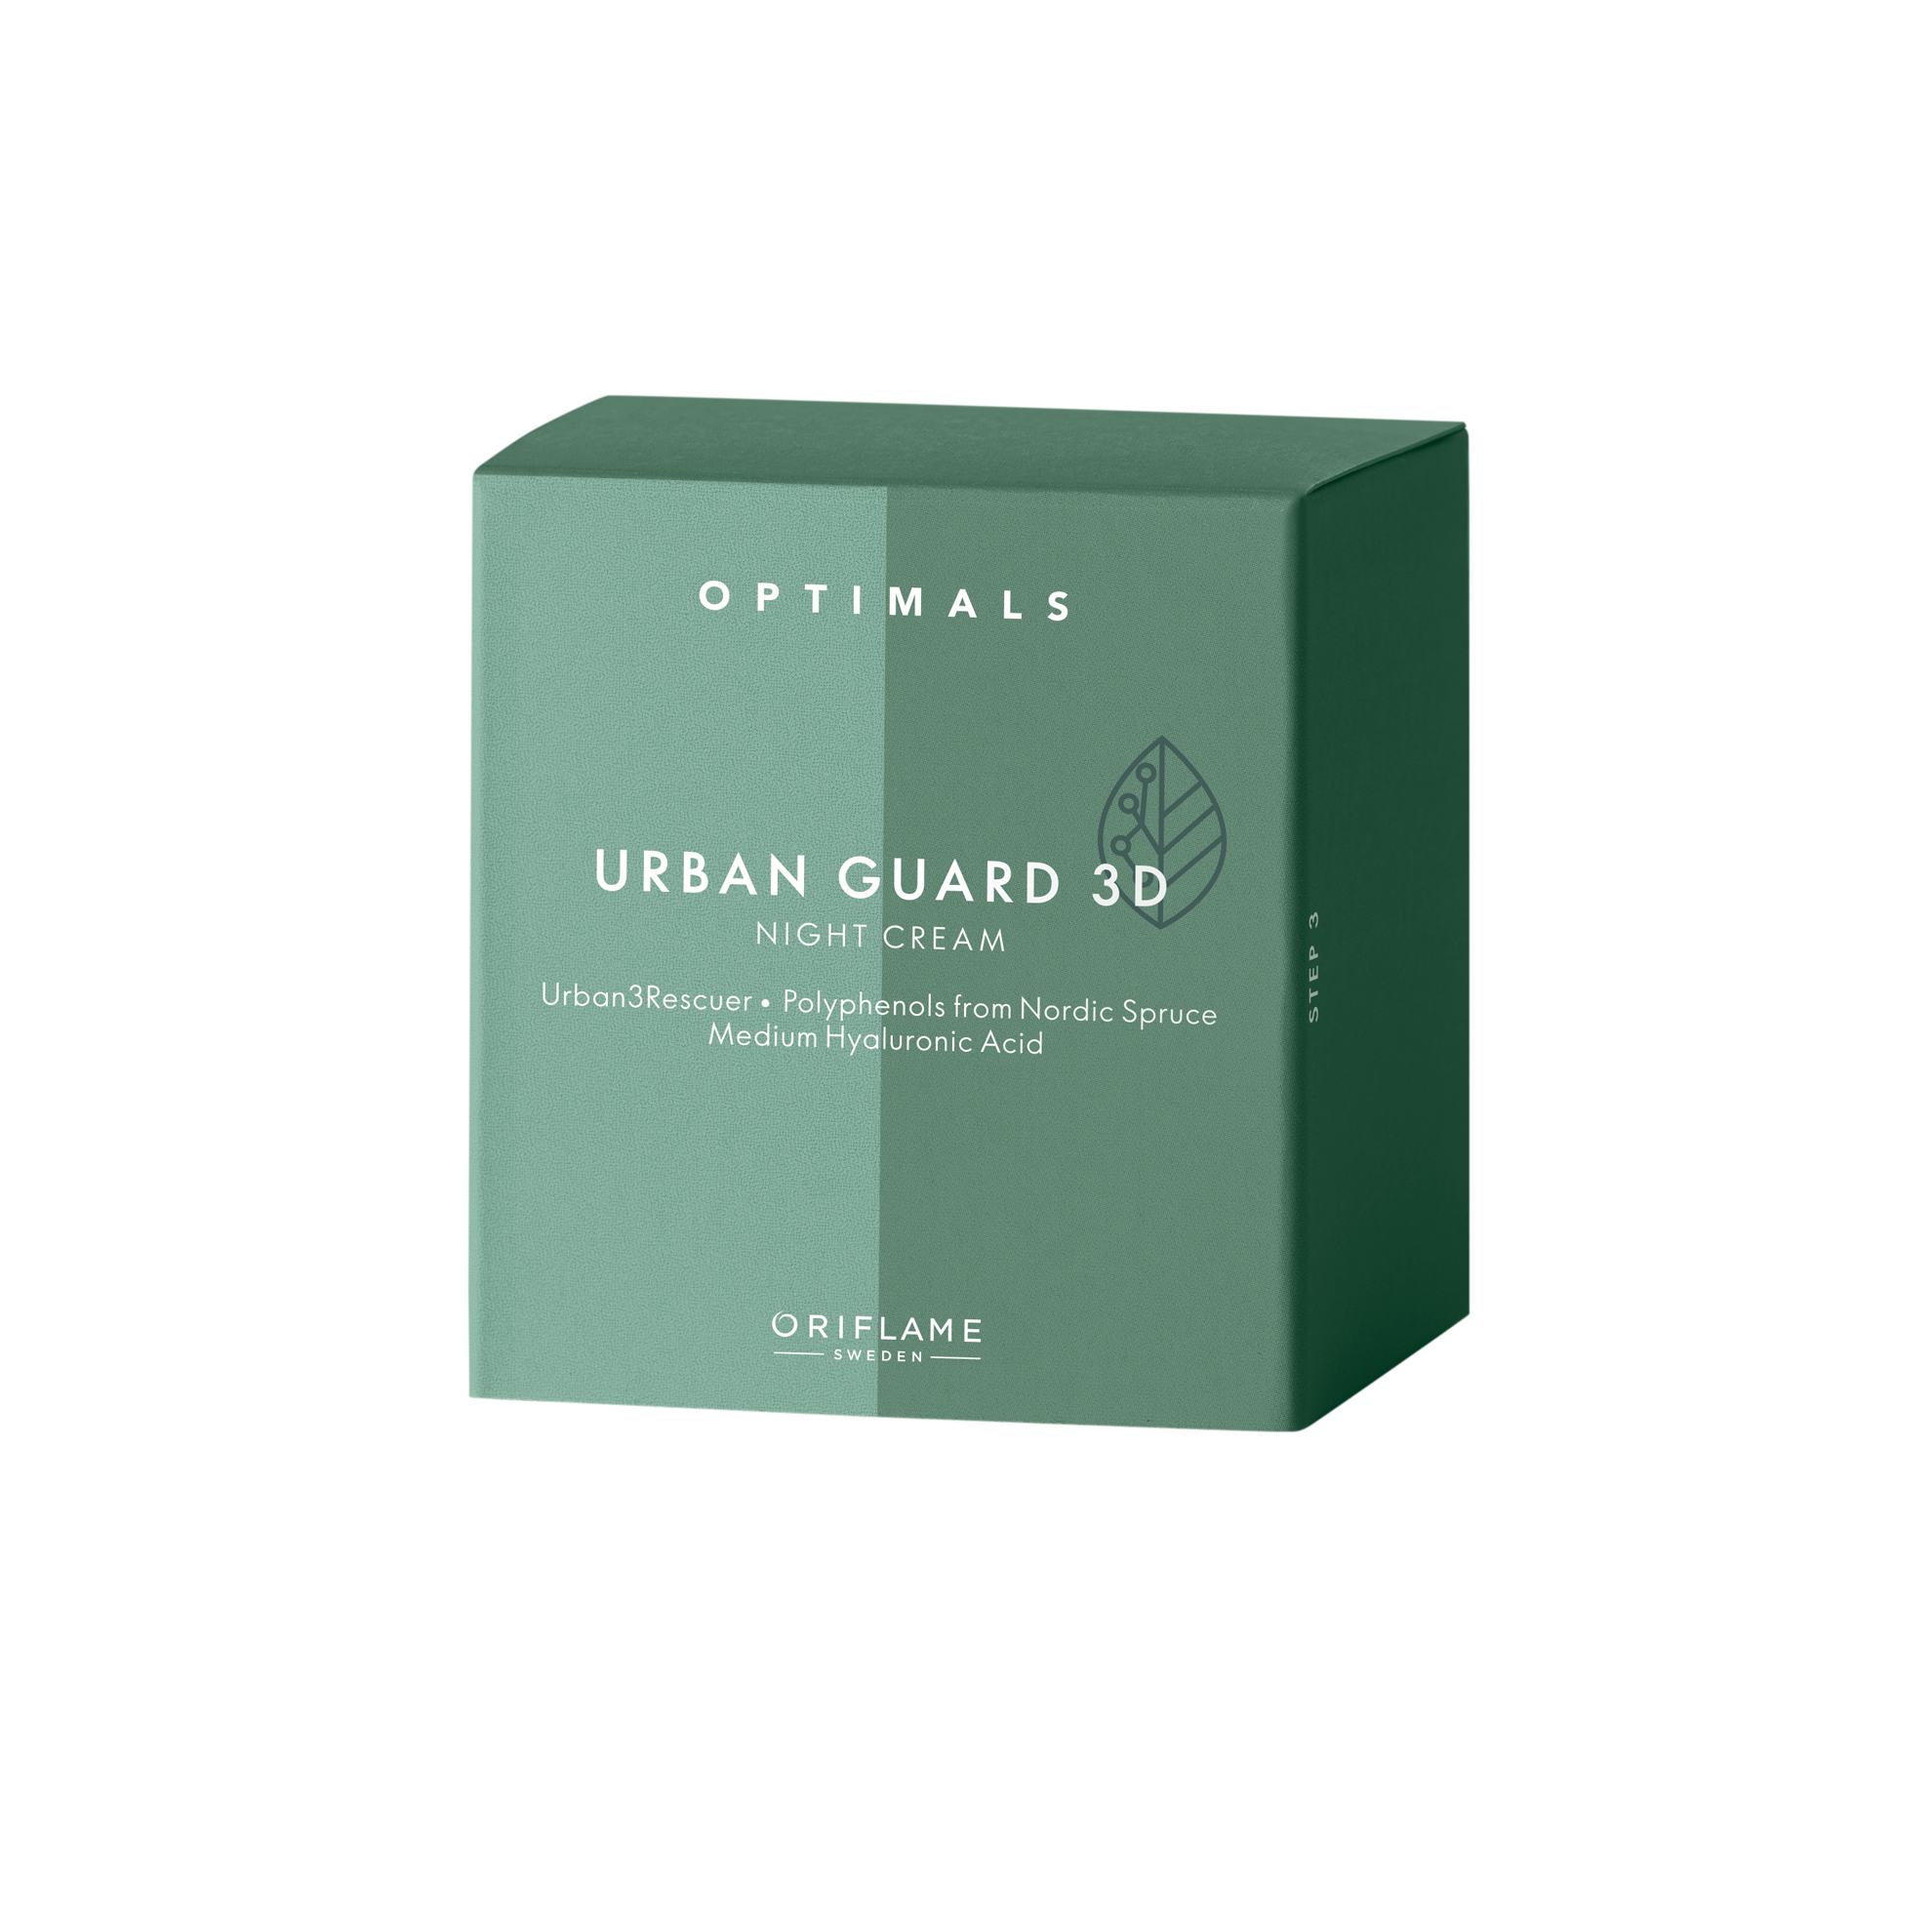 https://media-cdn.oriflame.com/productImage?externalMediaId=product-management-media%2fProducts%2f44260%2fGE%2f44260_1.png&id=15186919&version=1